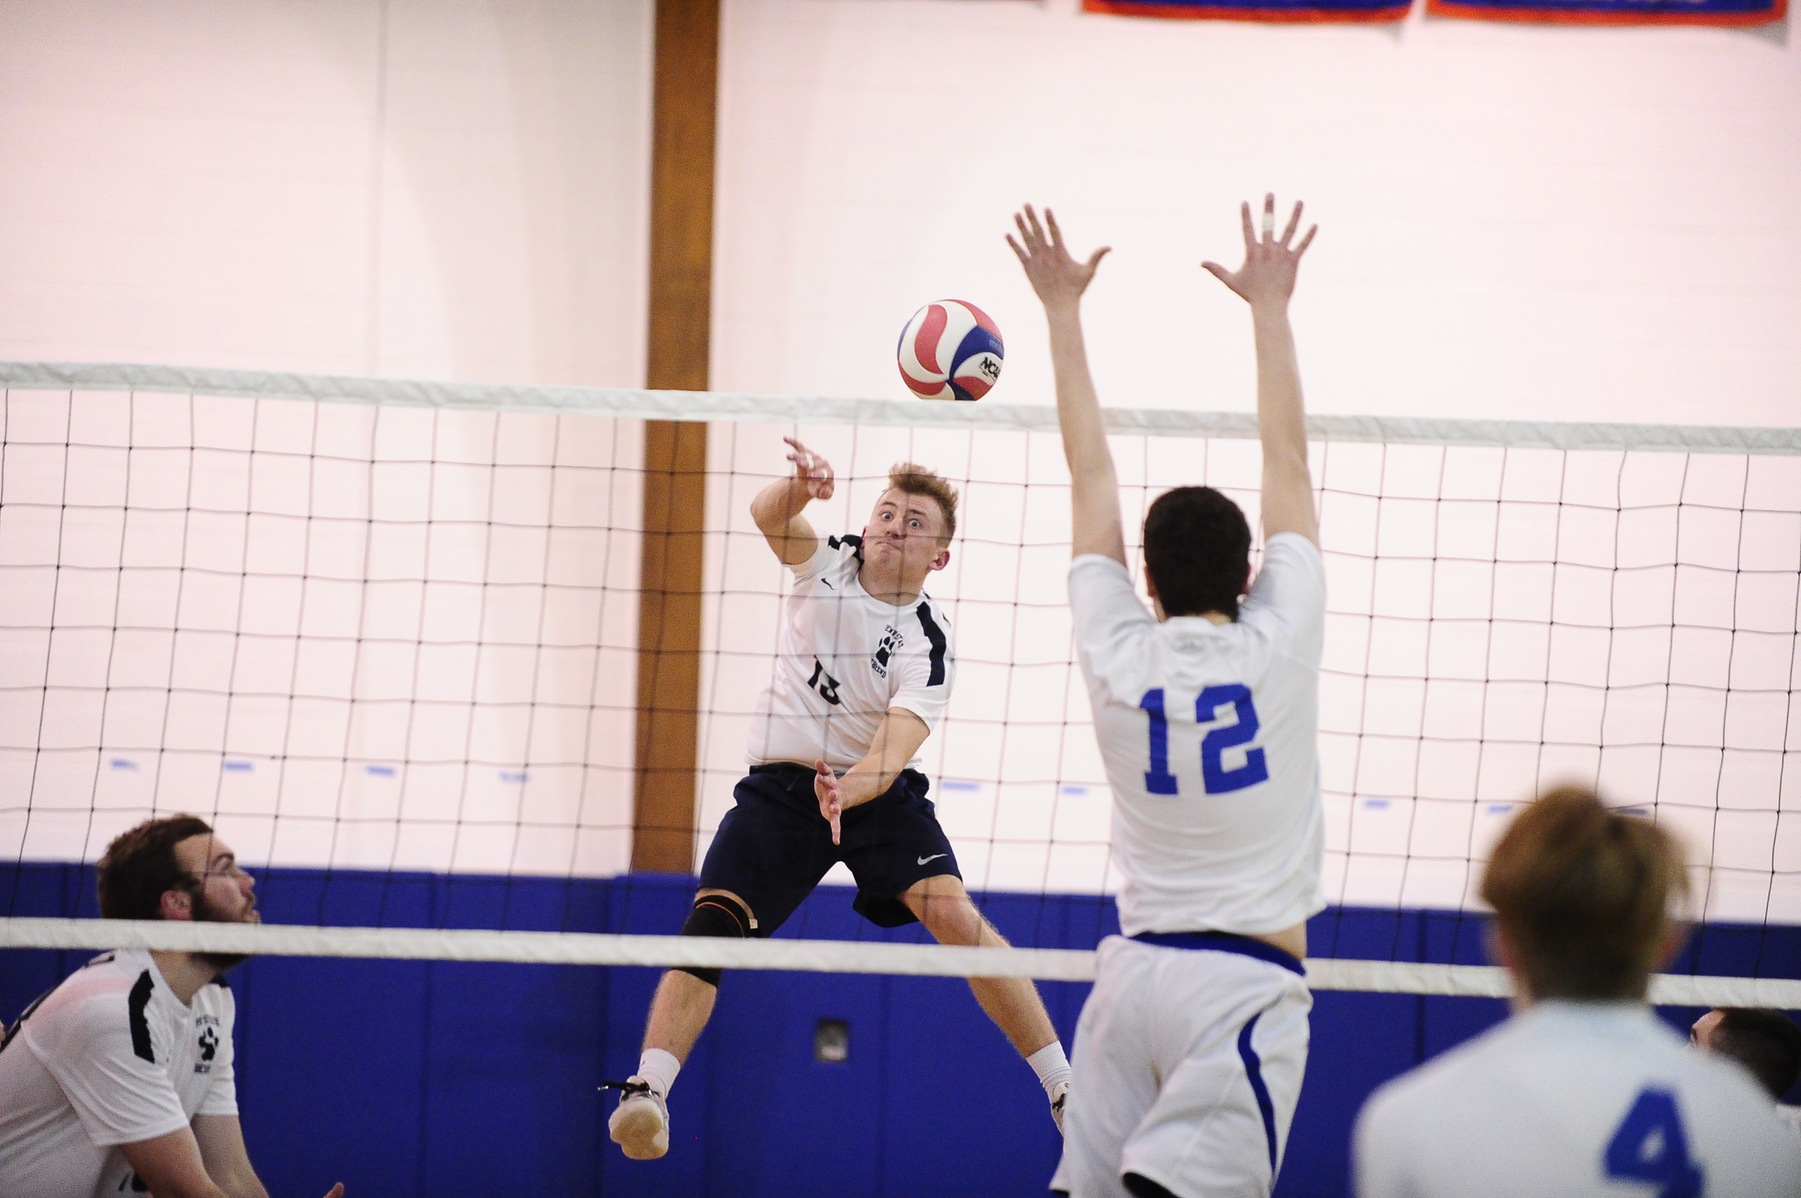 Lions Collect First Win Over Elmira in UVC Action